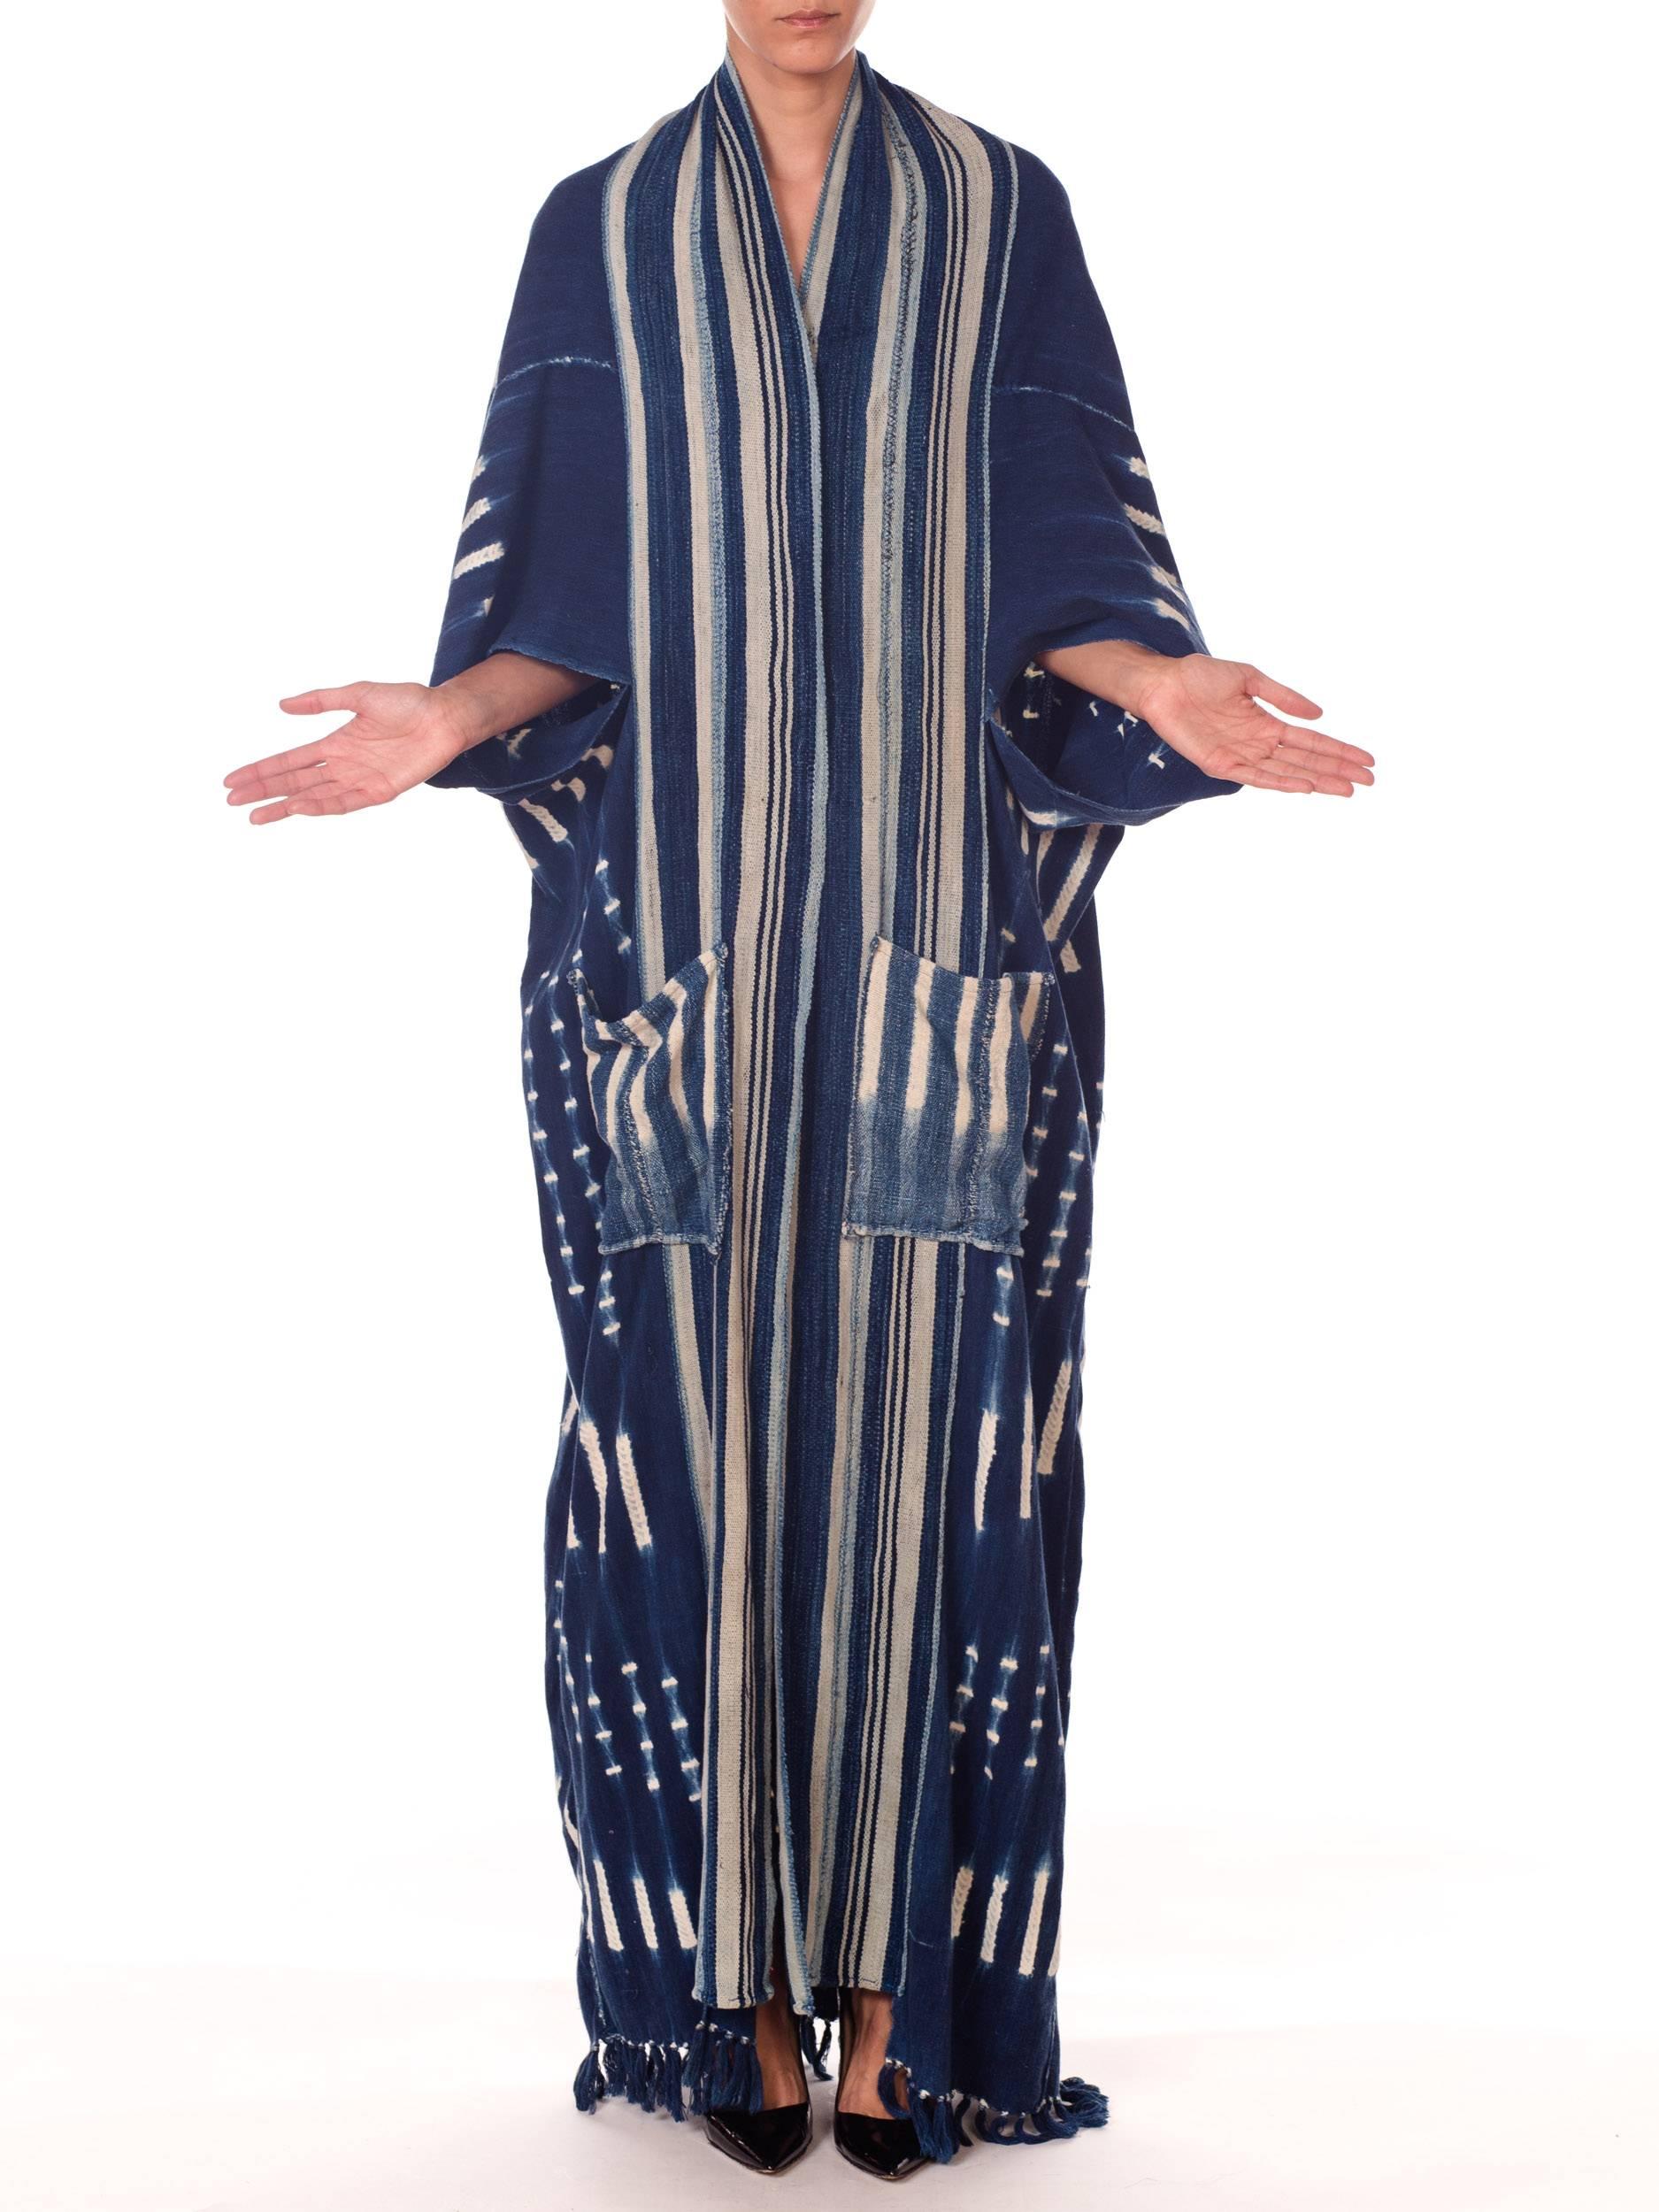 Women's or Men's Morphew Collection African Handwoven Tie-dye Indigo Robe with Striped Collar